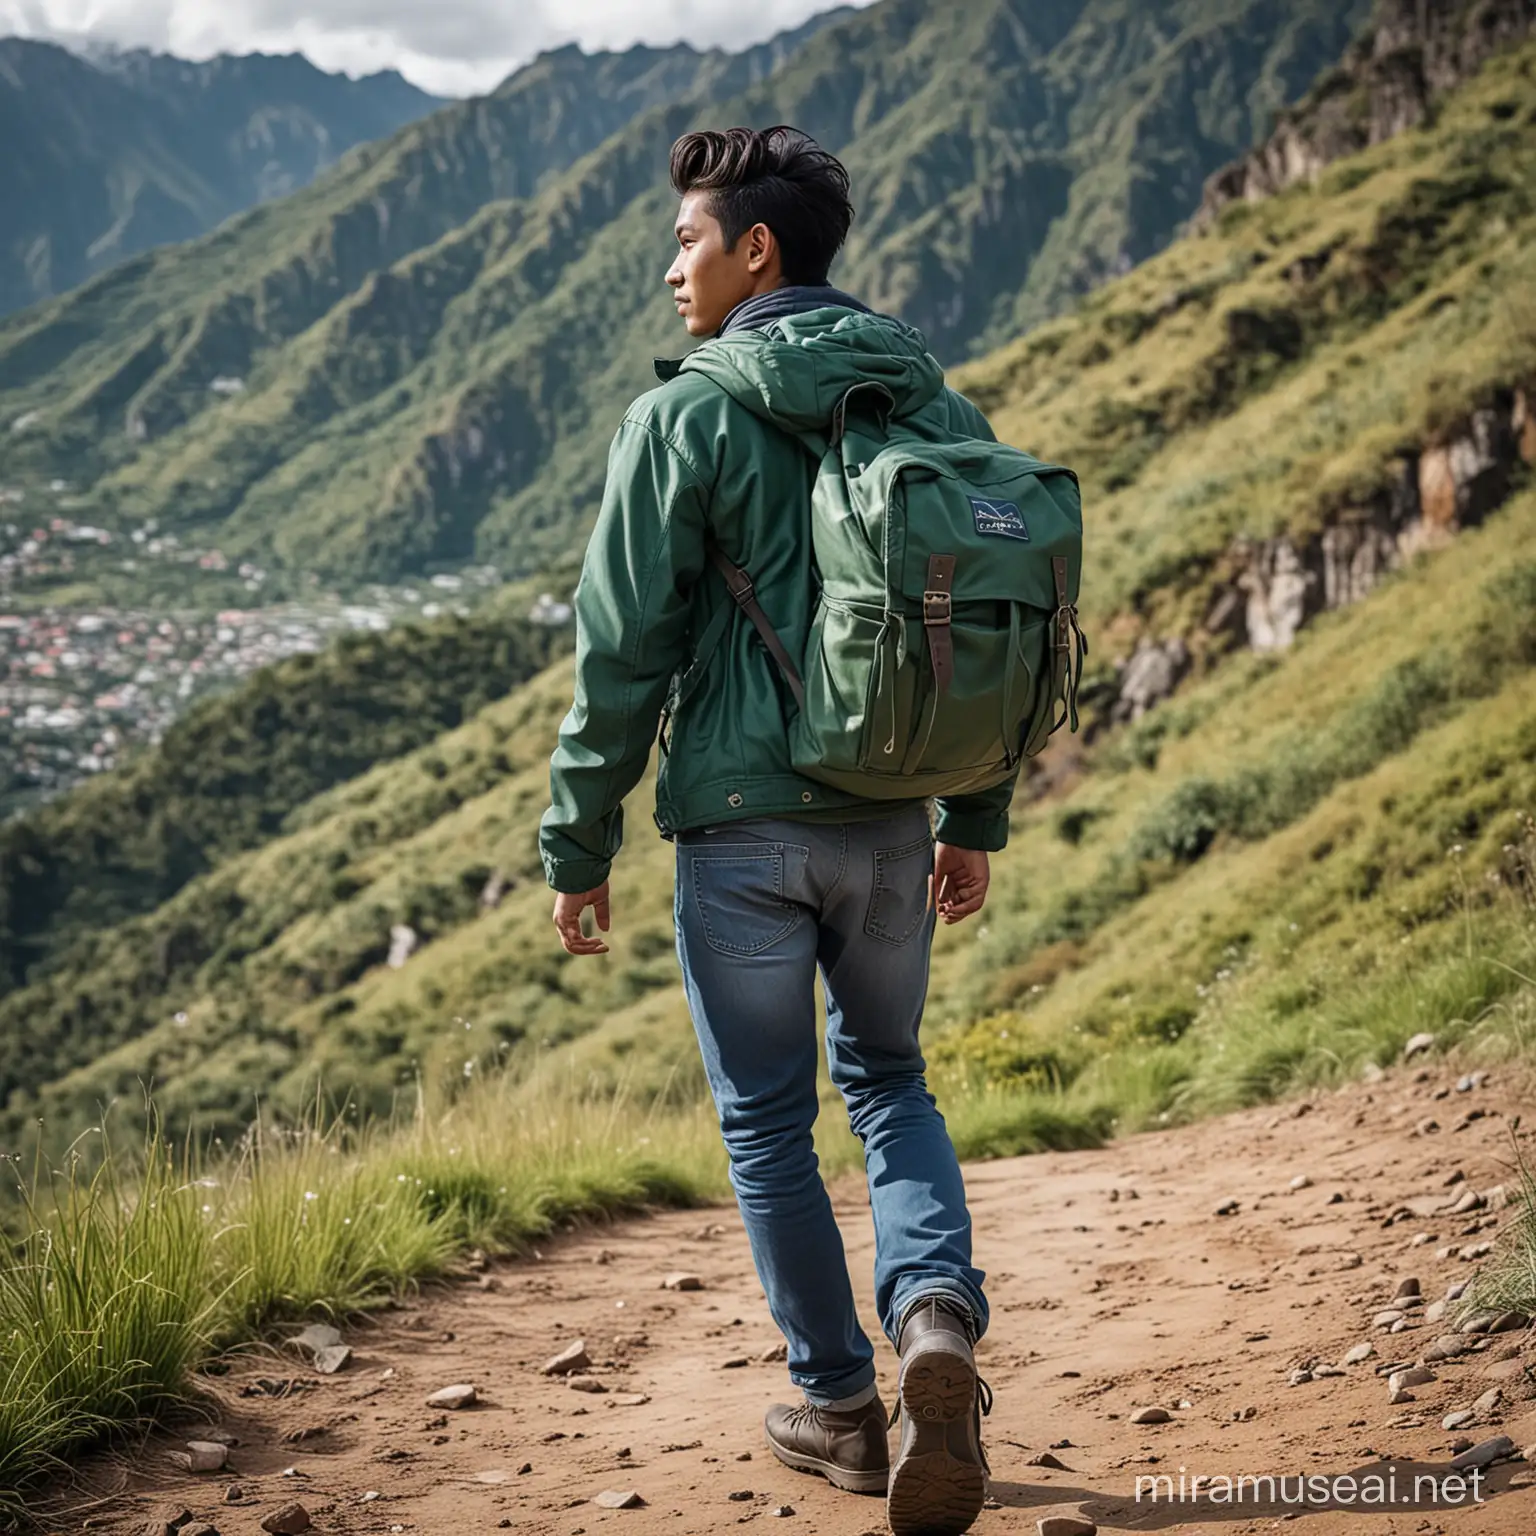 Young Indonesian Man with Backpack Standing in Front of Majestic Mountain Landscape